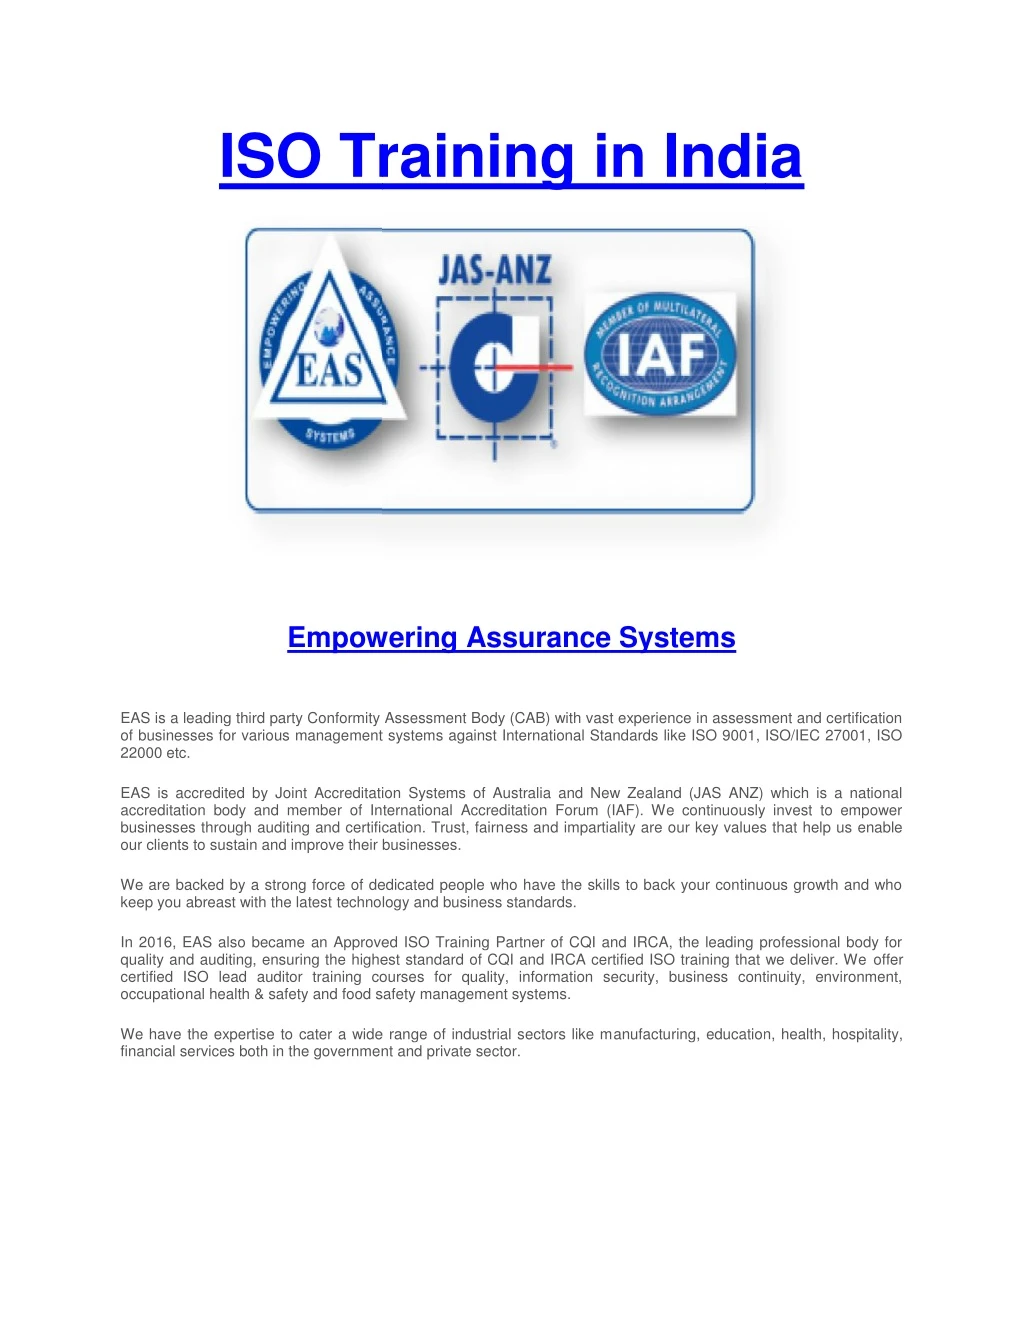 iso training in india iso training in india